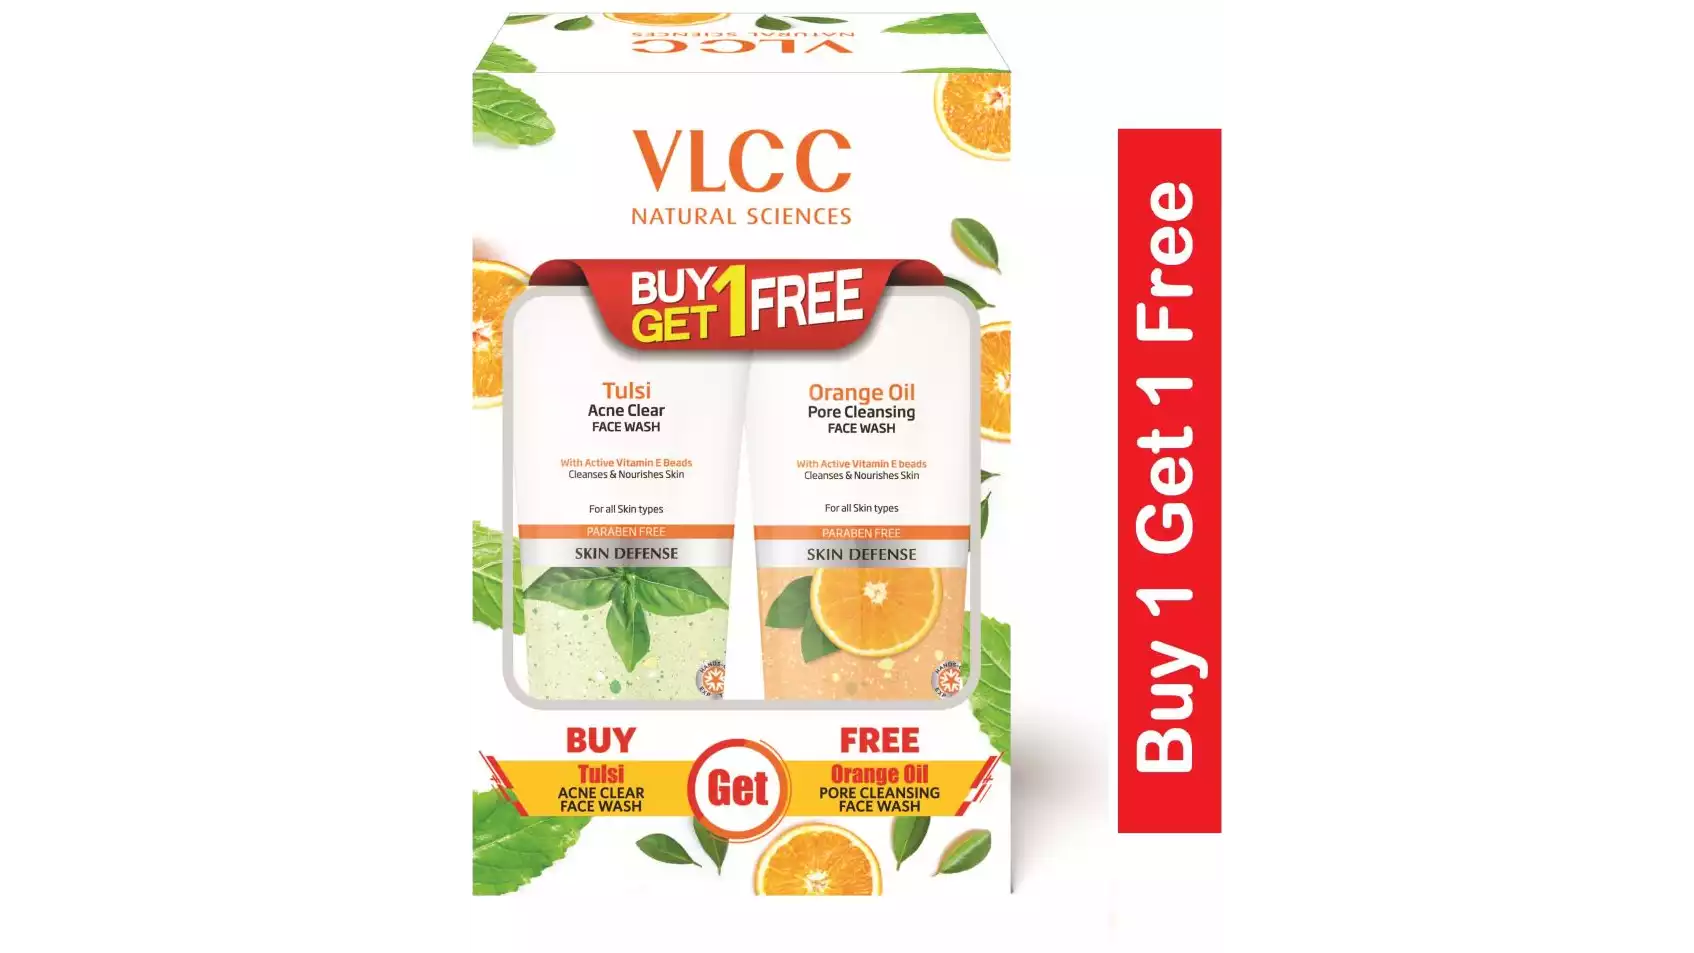 VLCC Tulsi Acne Clear Face Wash + Free Orange Oil Pore Cleansing Face Wash(150Ml Each) (1Pack)